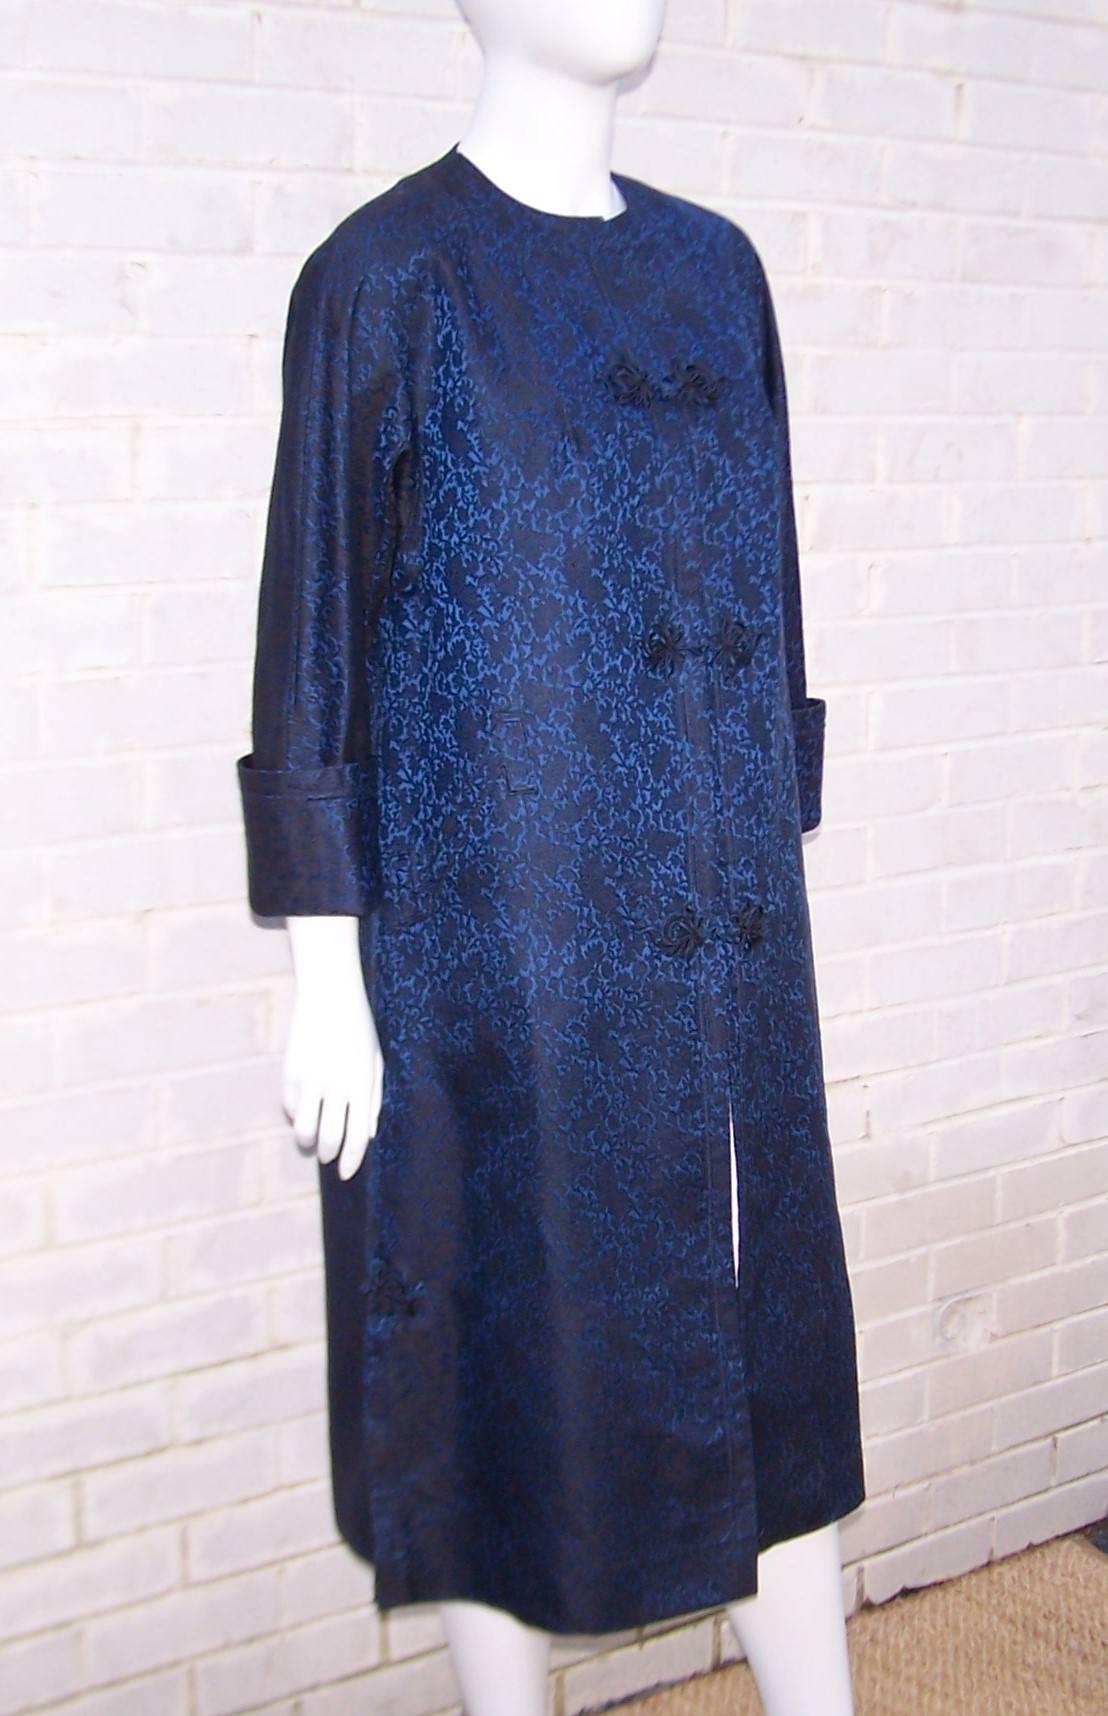 Pair this C.1950 evening coat with a little black dress or a cigarette pant for a touch of Asian exoticism.  The classic mandarin silhouette is enhanced by the black and blue jacquard fabric as well as the detailed stitching at the collar, cuffed